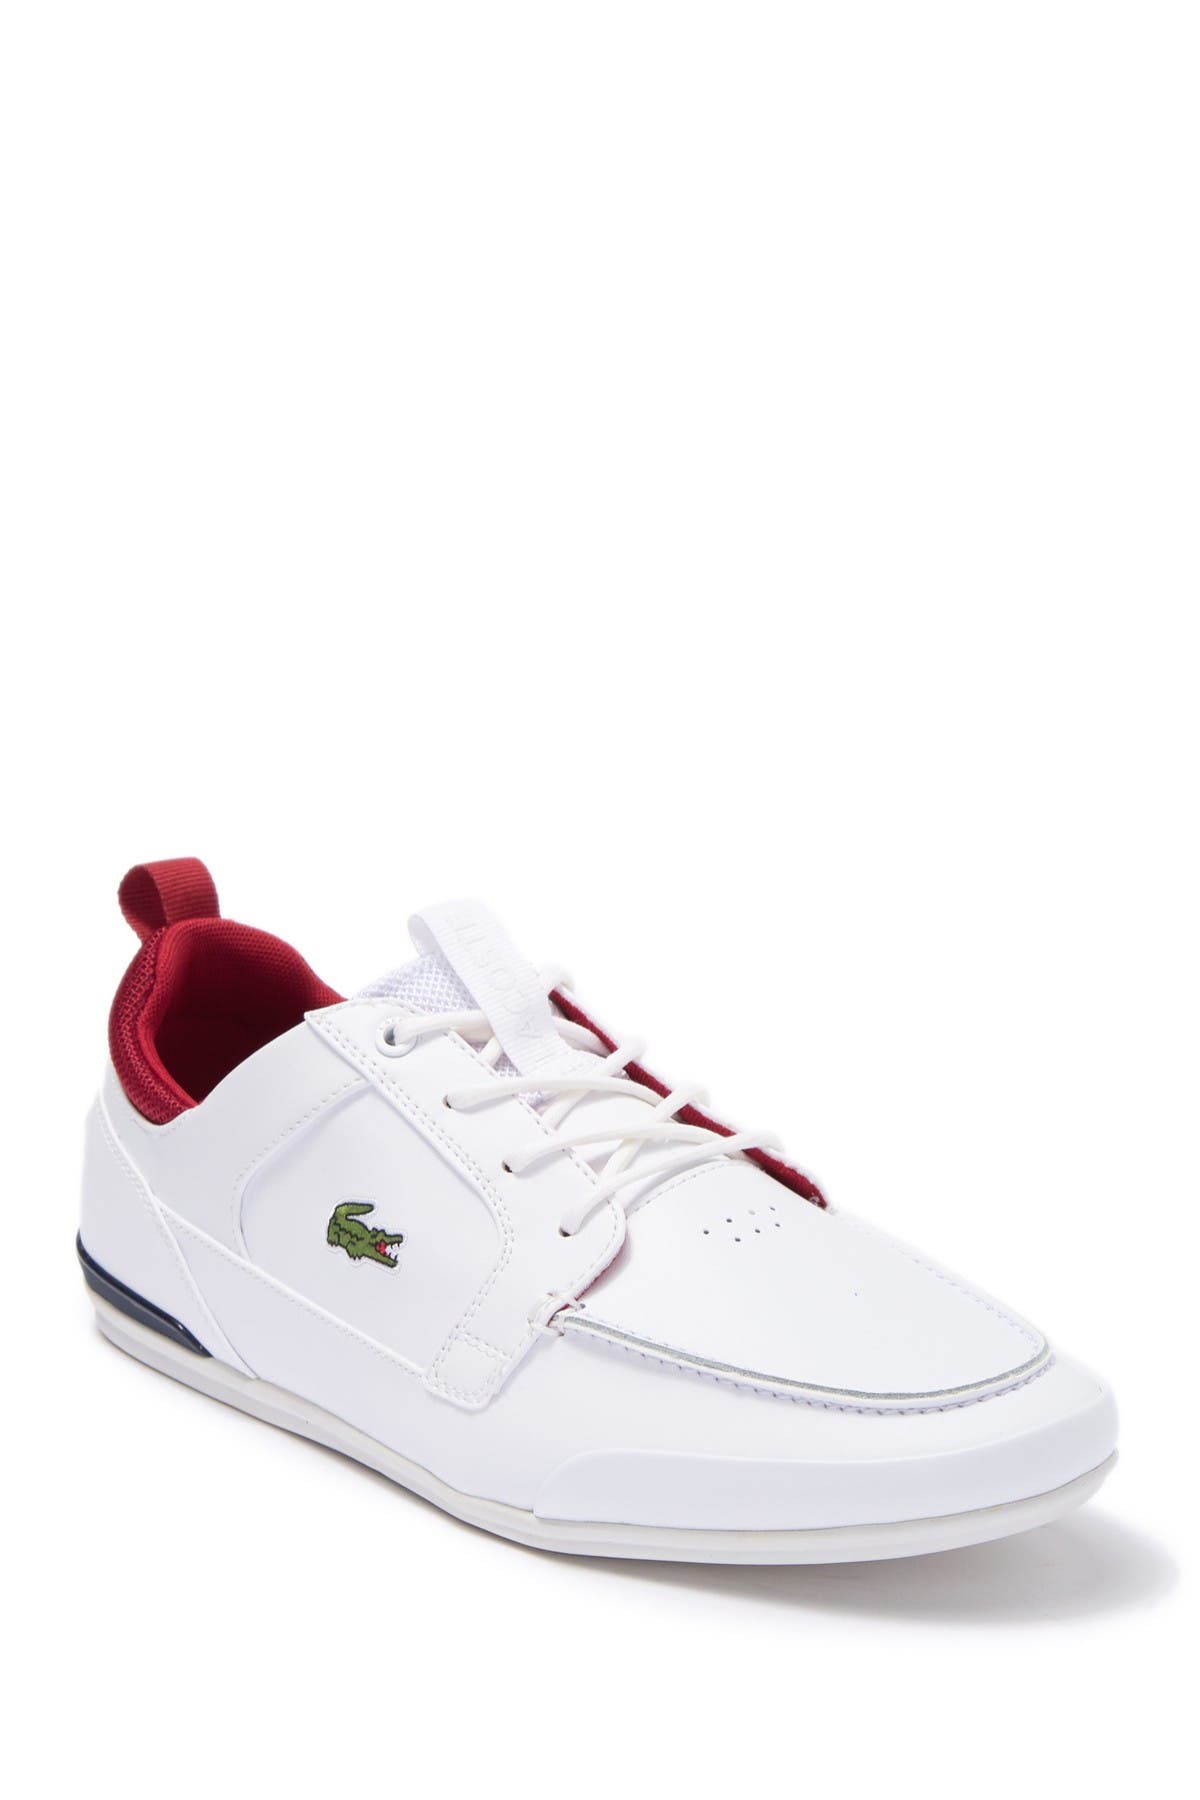 Lacoste | Marina Lace-Up Sneaker 